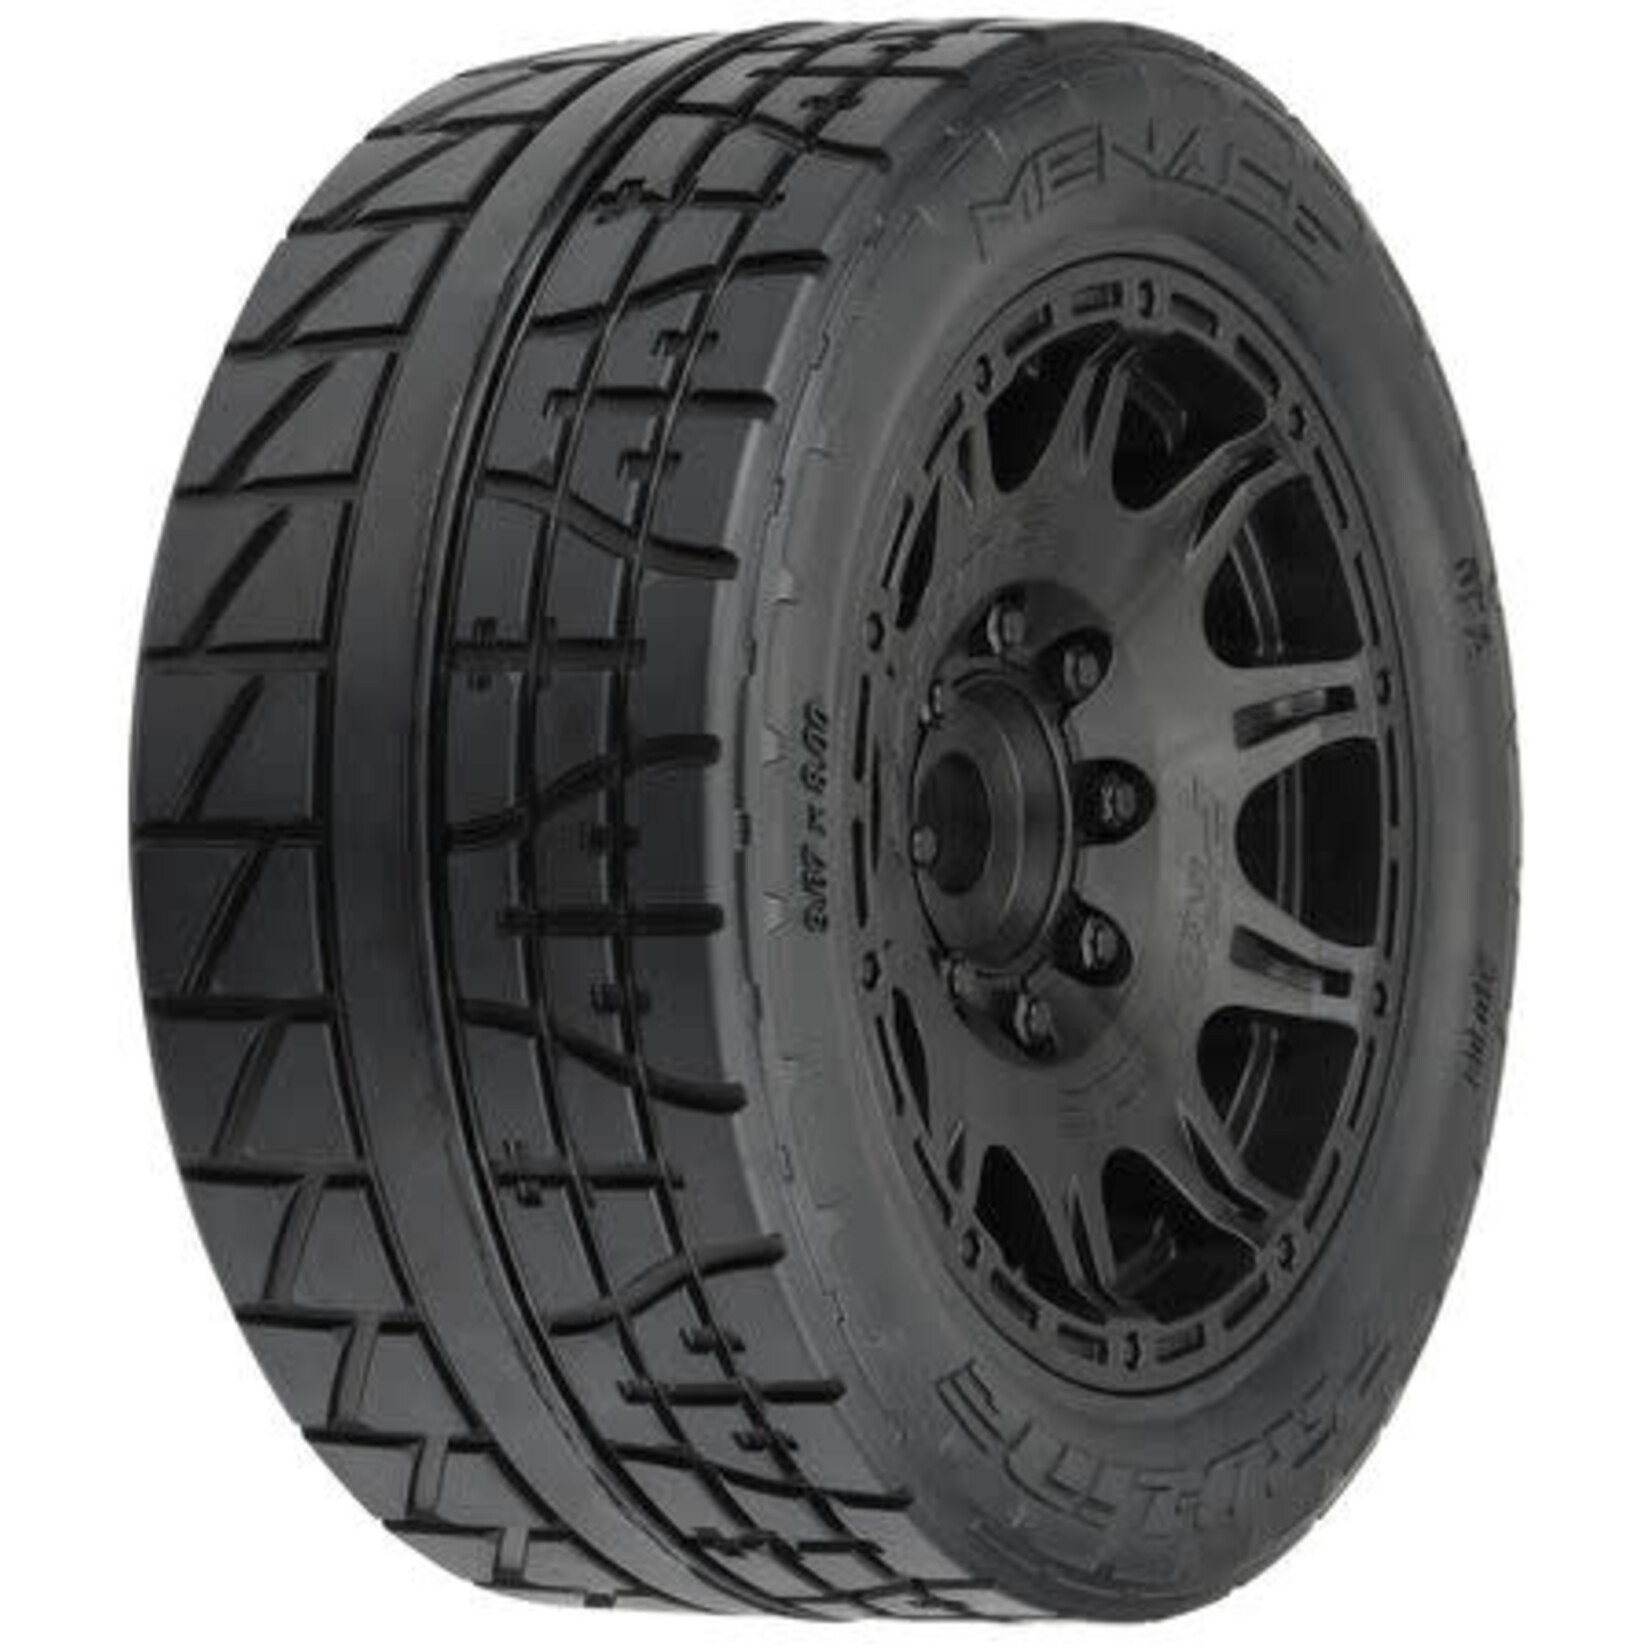 Proline Racing PRO1020510  1/6 Menace HP BELTED F/R 5.7" MT Tires Mounted 24mm Blk Raid (2)